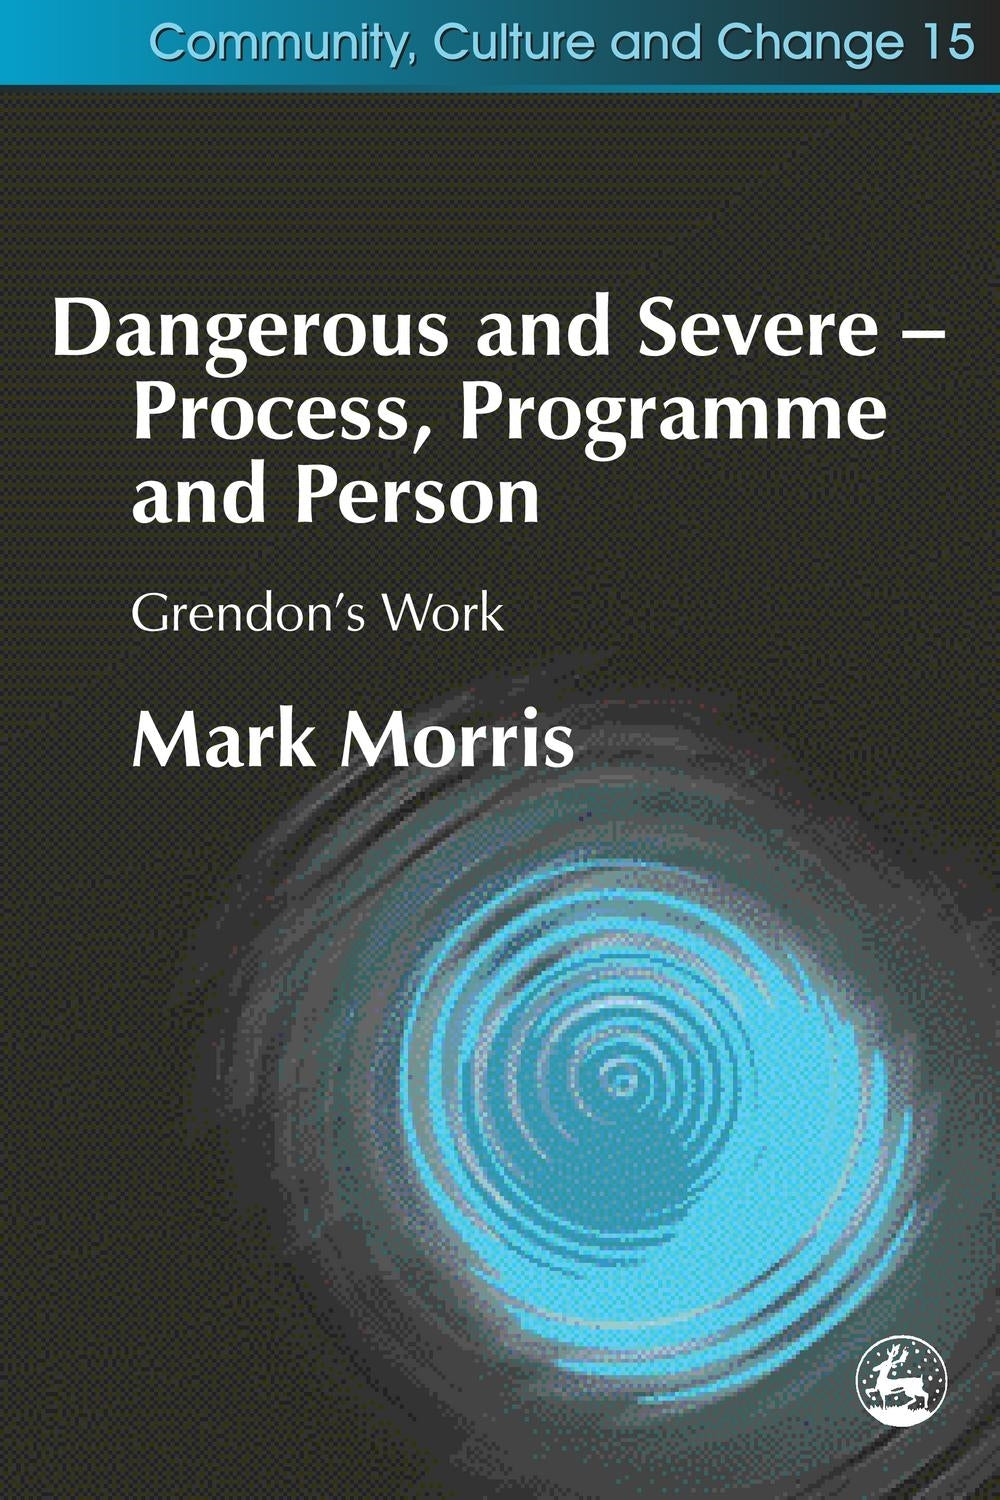 Dangerous and Severe - Process, Programme and Person by Mark Morris